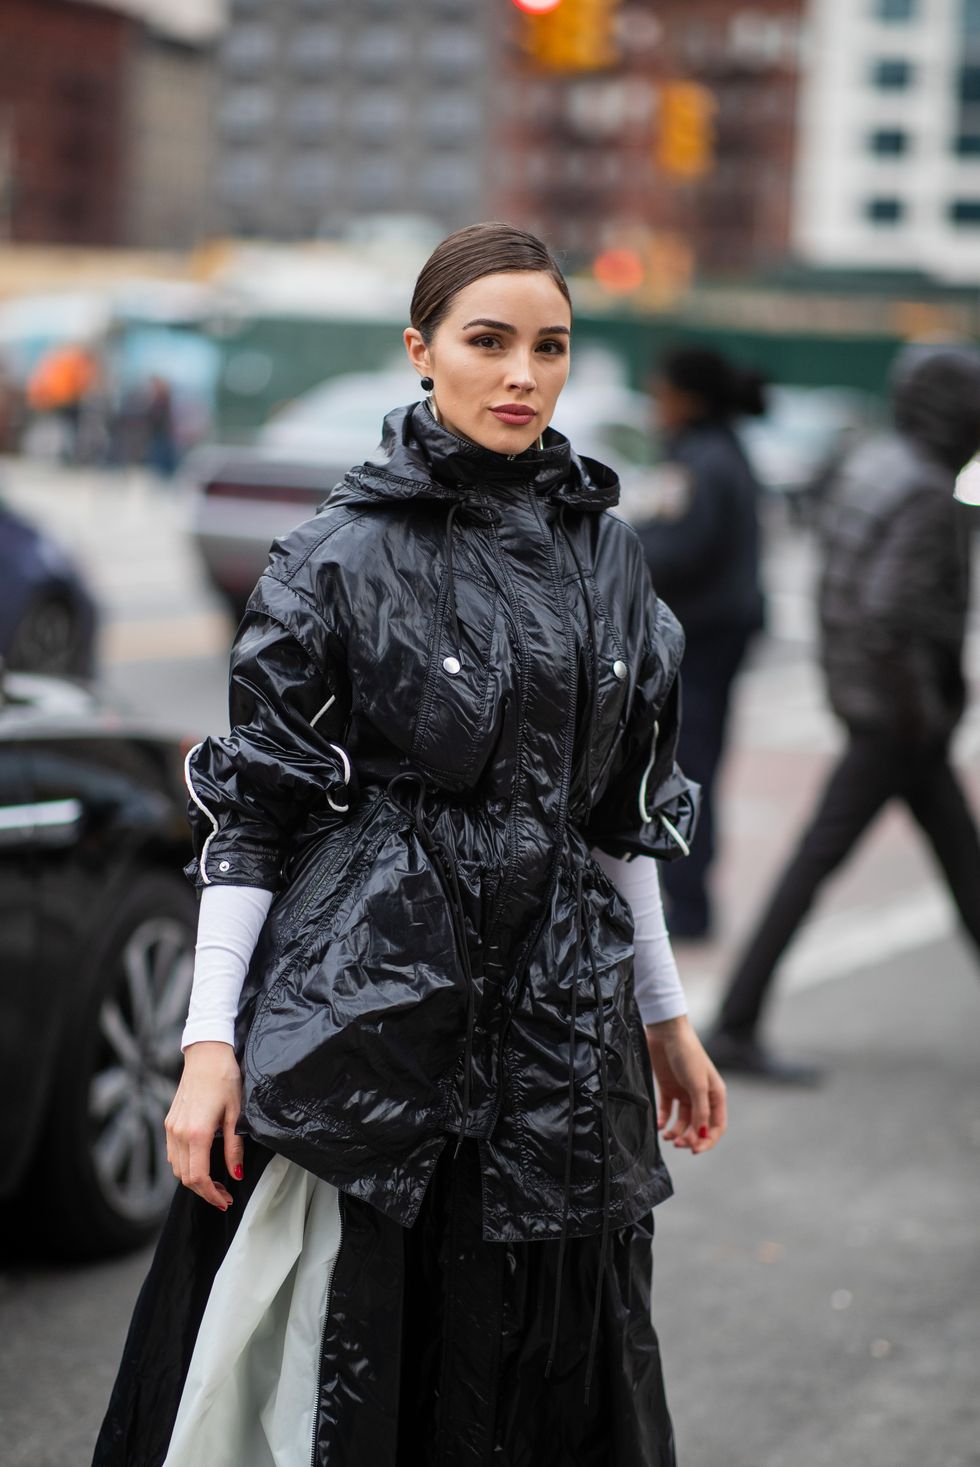 7 Cute Rainy Day Outfits – What to Wear in the Rain